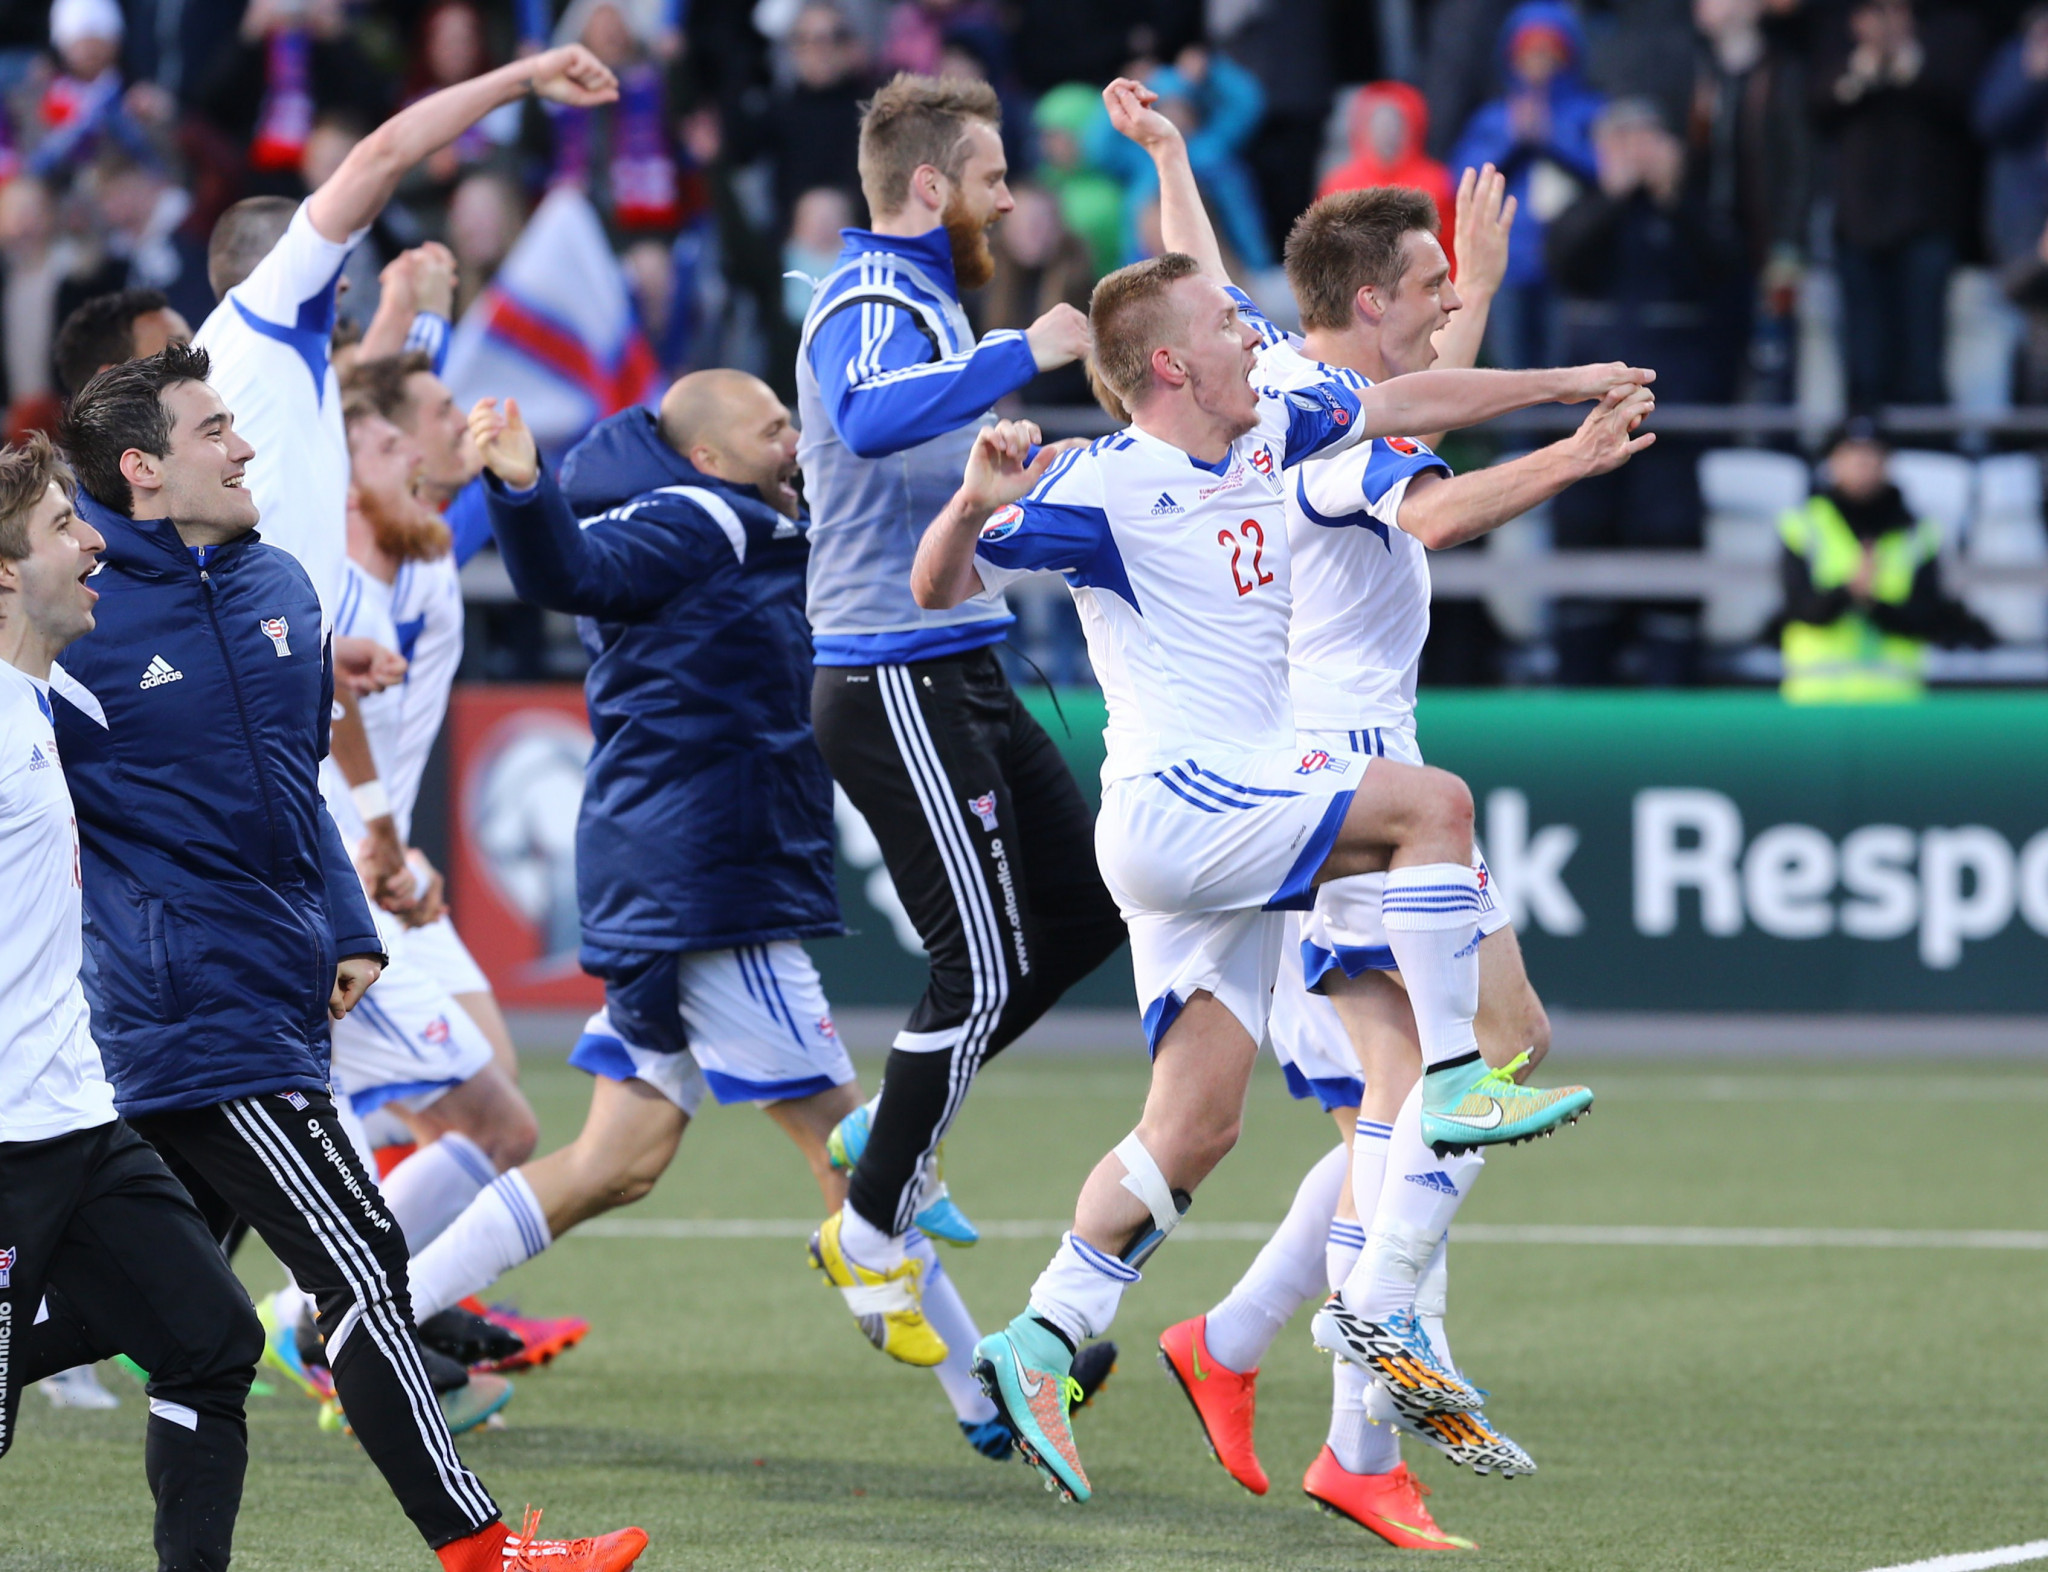 Faroe Islands made an impact on Euro 2016 qualifying by beating Greece twice ©Getty Images